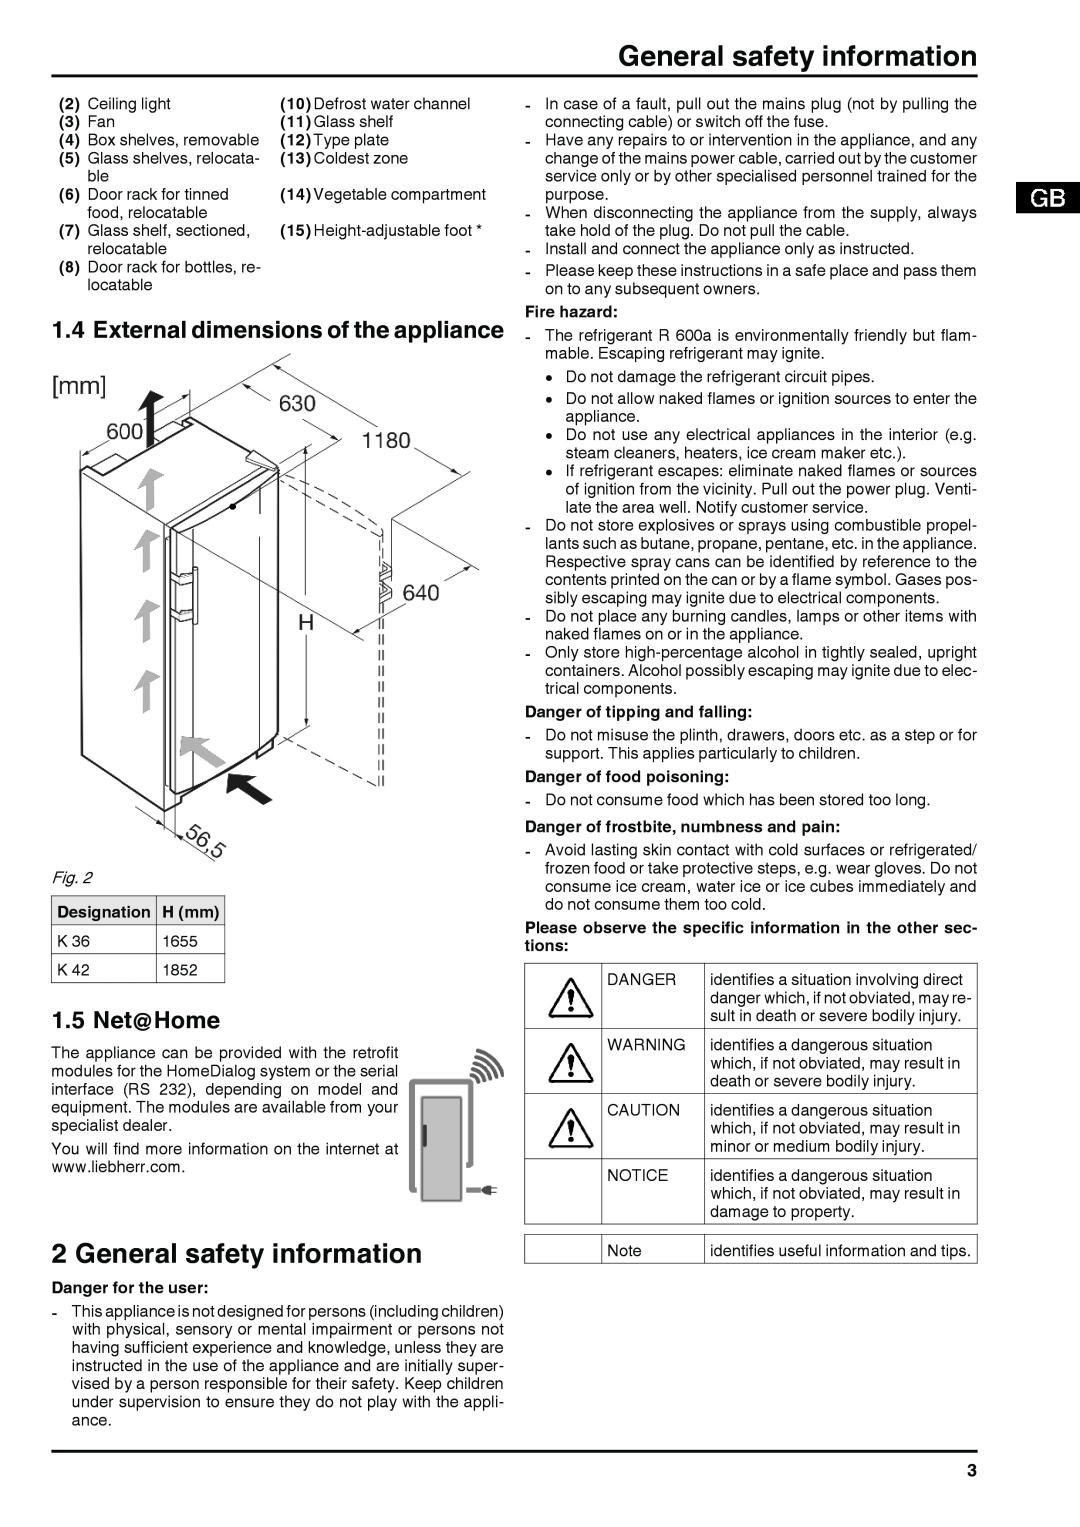 Liebherr 120309 7084442 - 00 General safety information, External dimensions of the appliance, 1.5 Net@Home 